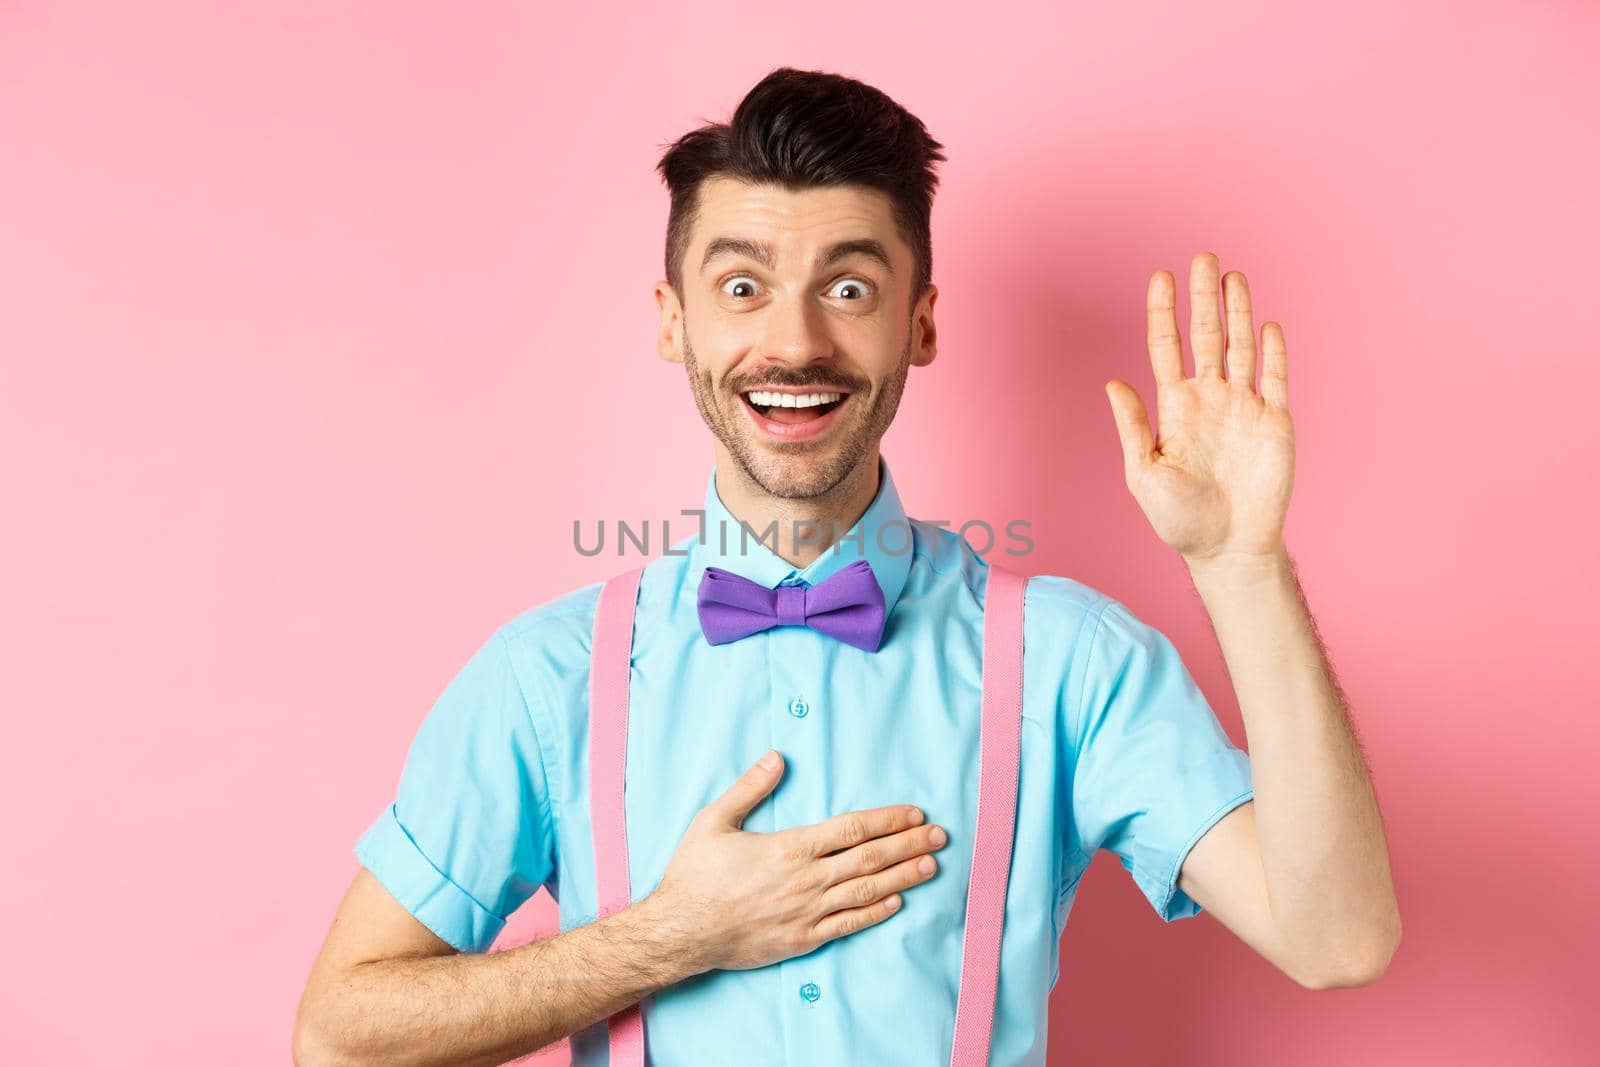 Happy young man telling truth, making promise, holding hand on heart and arm raised, swearing to be honest, smiling at camera, standing over pink background.